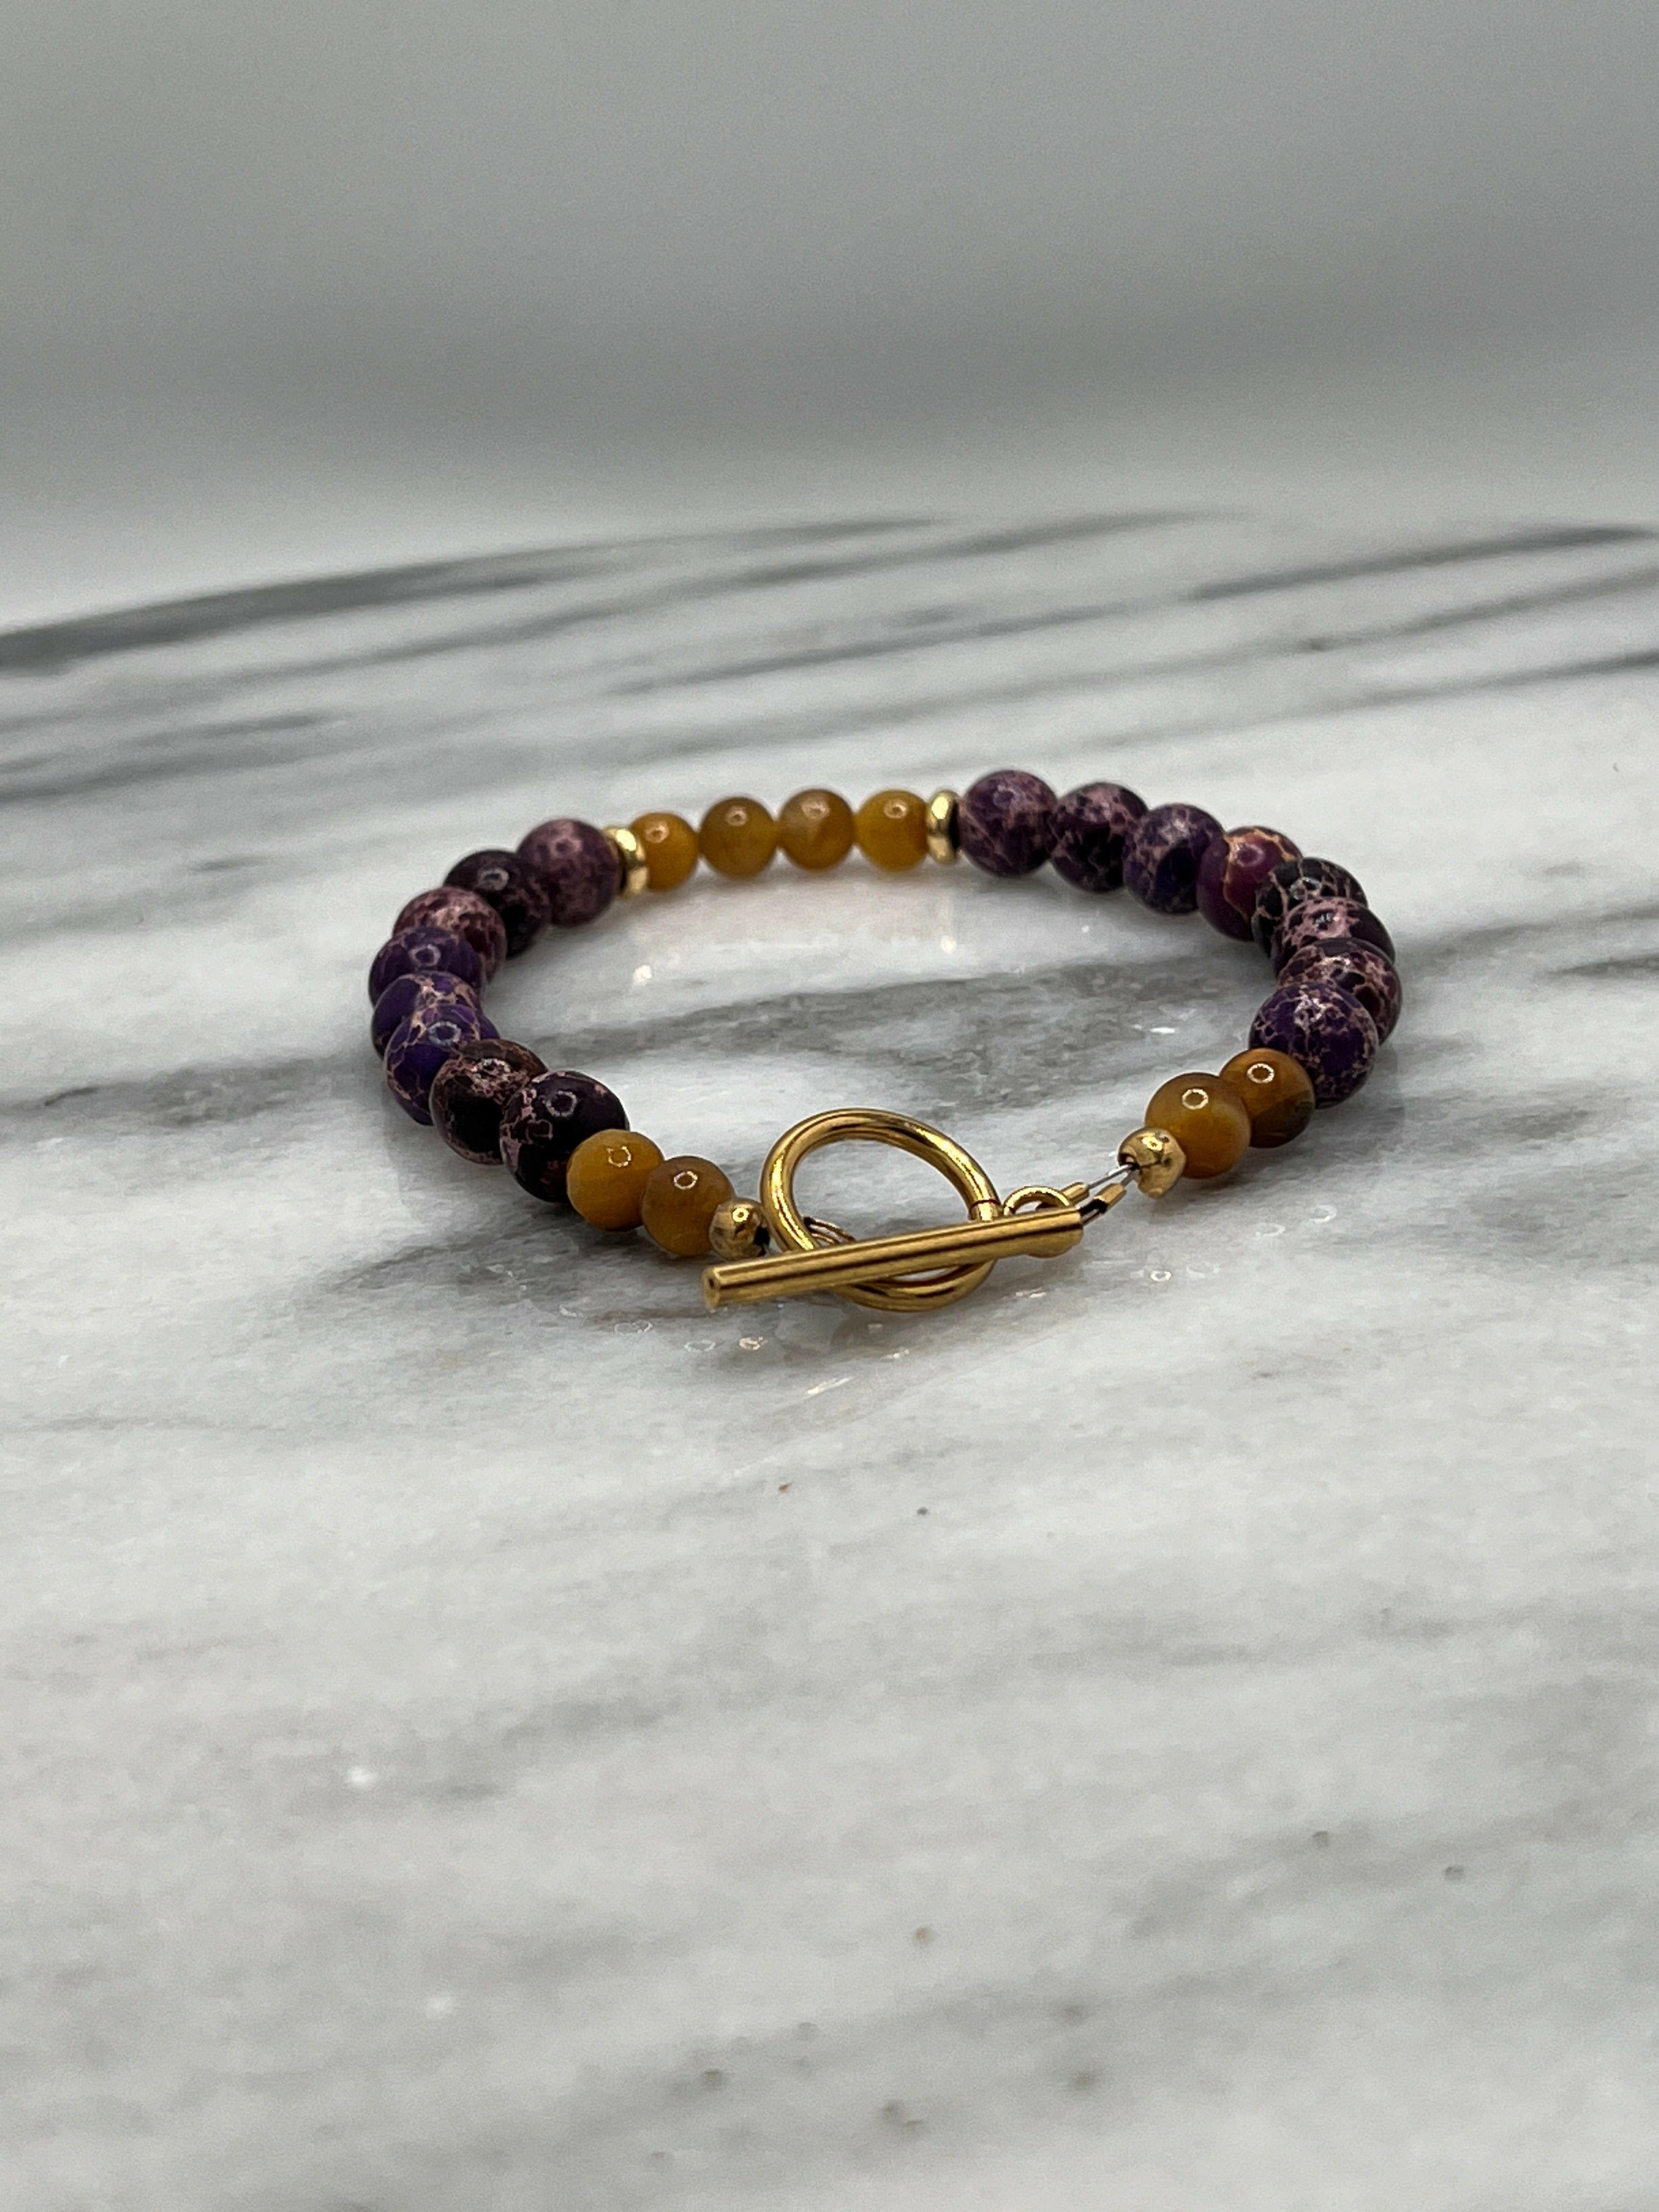 Bec Sue Jewelry Shop Exquisite Purple Jasper & Gold Tiger Eye Bracelet with Gold Clasp - 8mm/6mm Luxury Beaded Elegance Tags 712